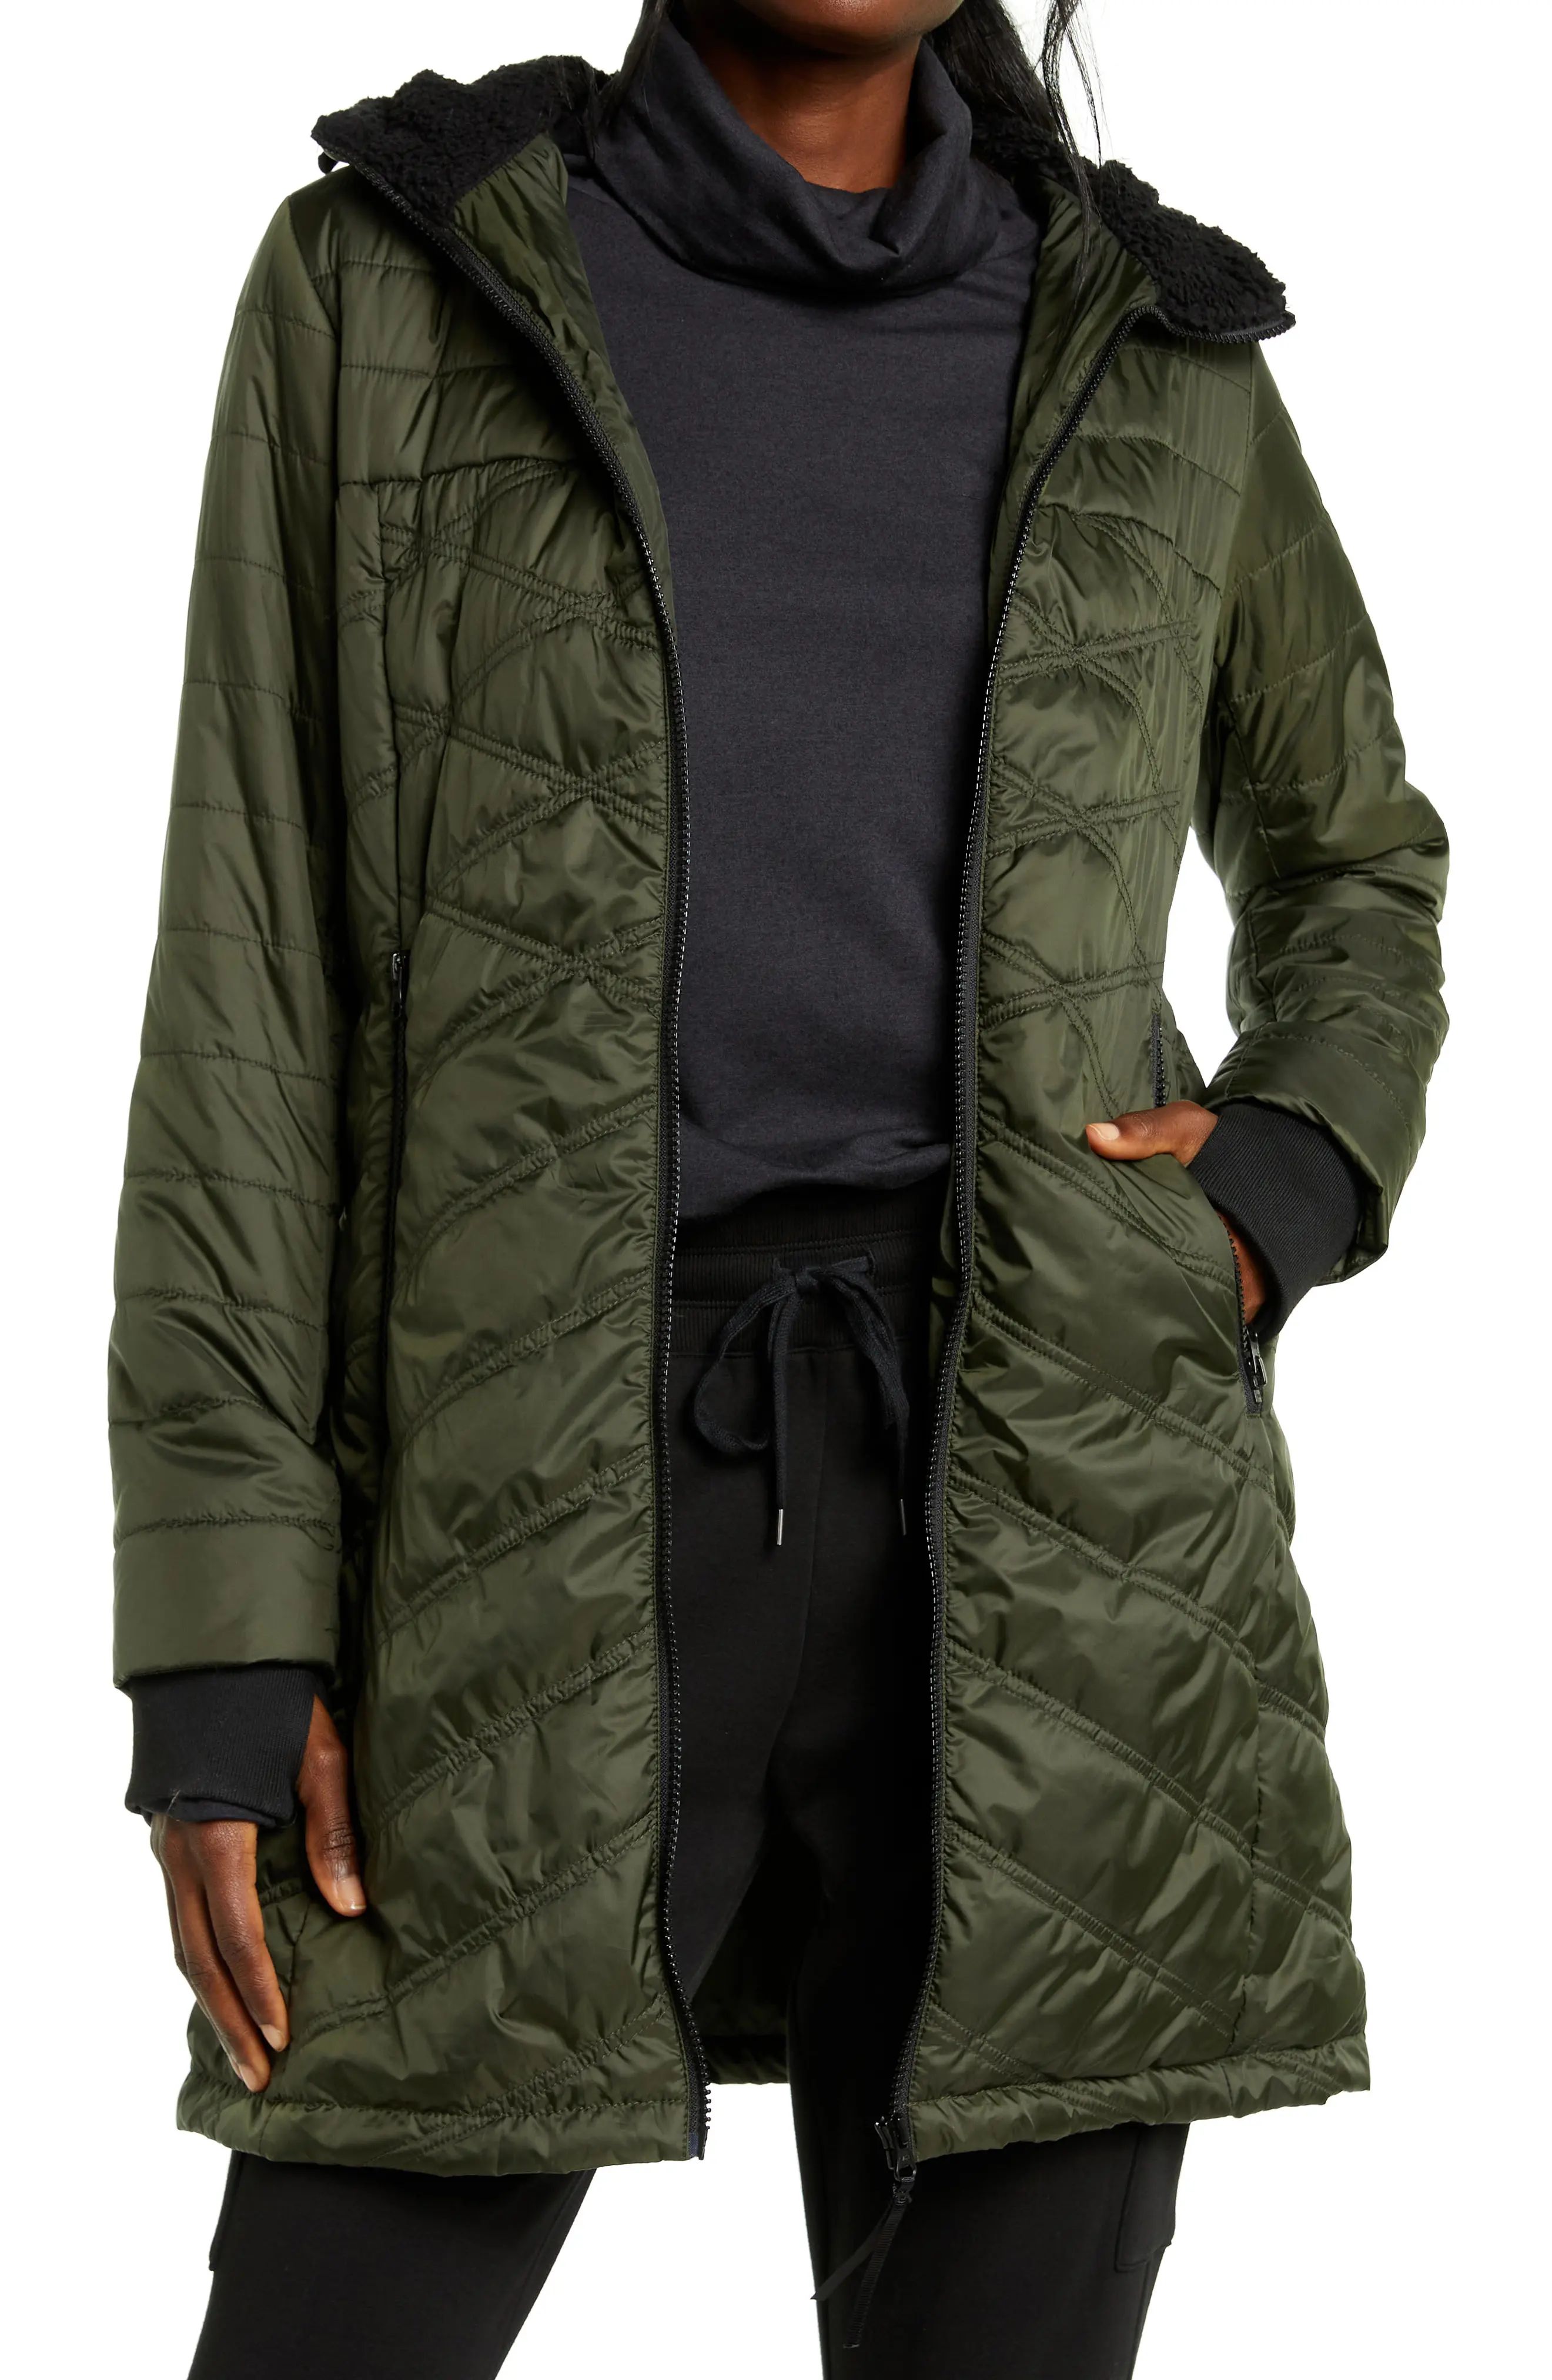 Zella Longline Quilted Recycled Polyester Jacket in Olive at Nordstrom, Size Small | Nordstrom